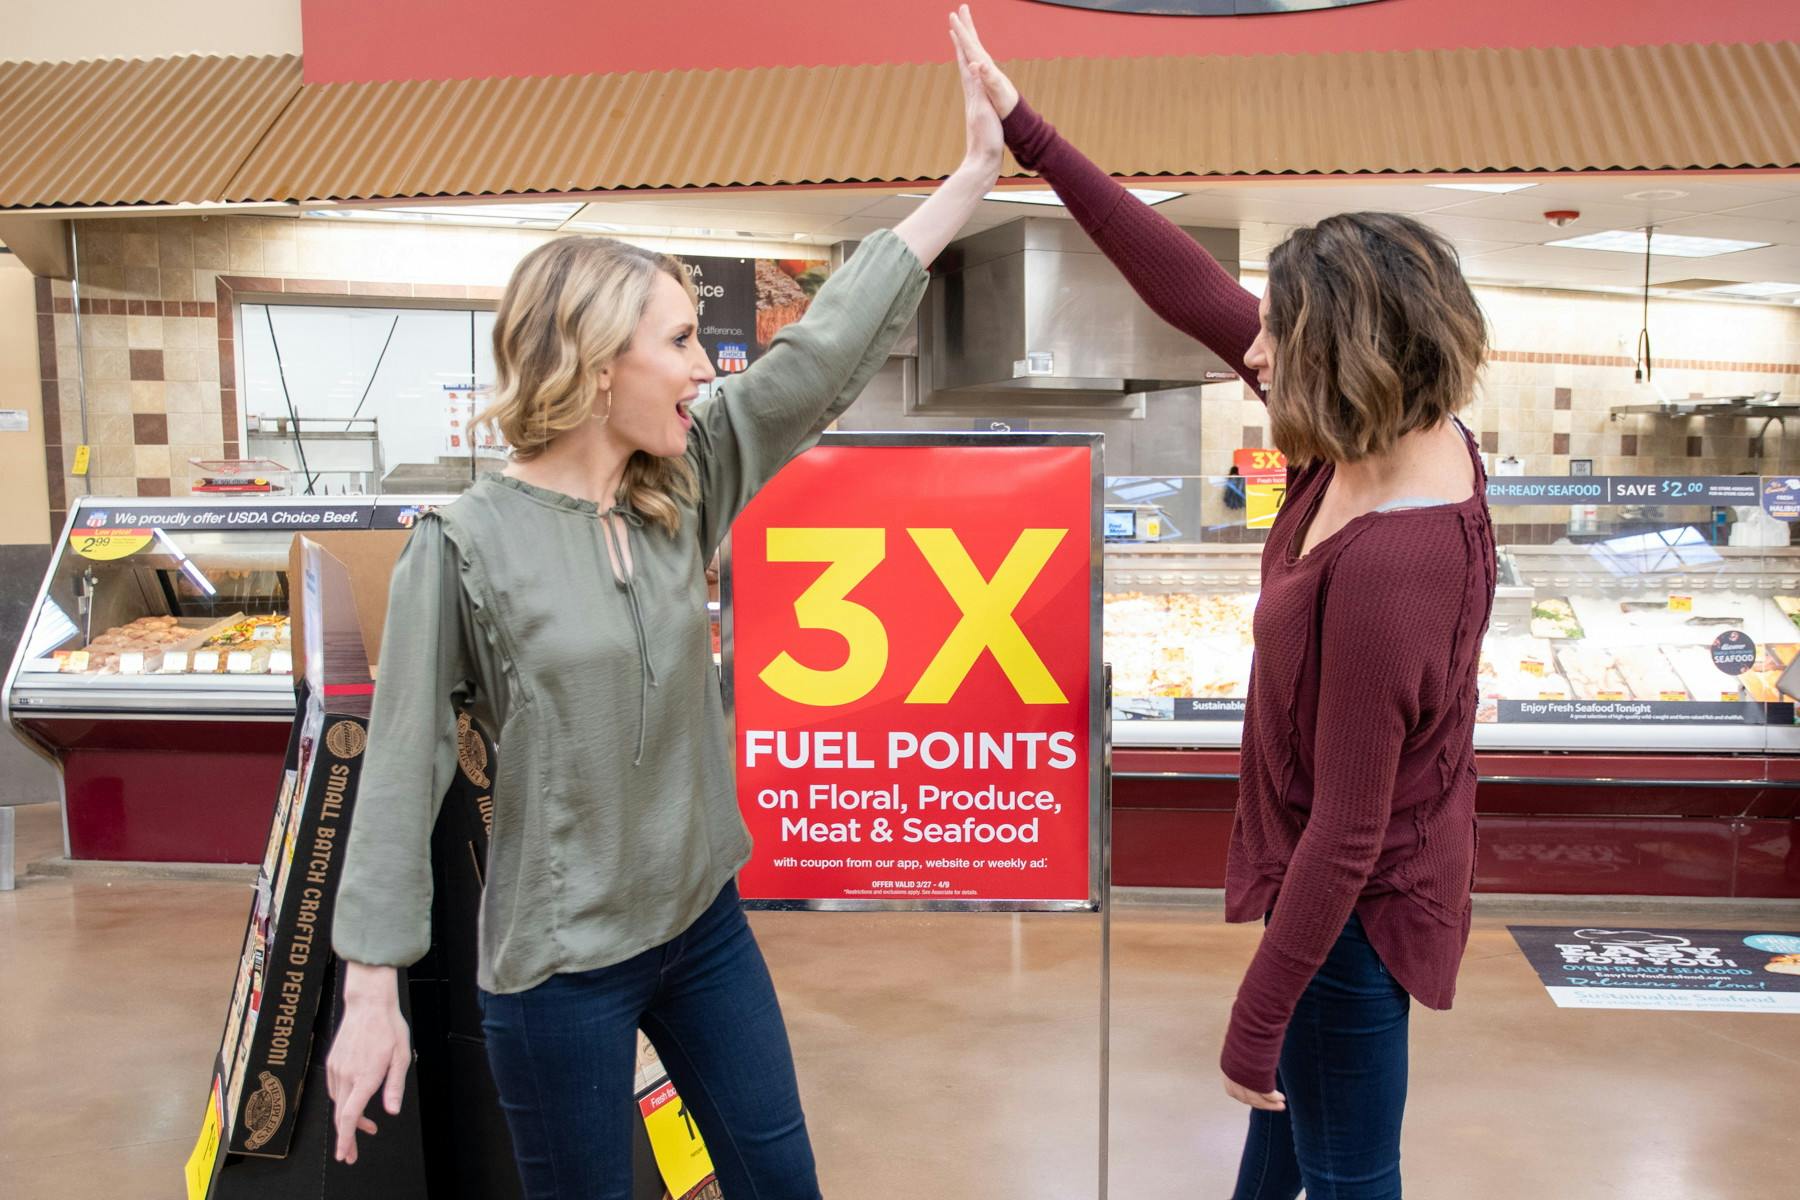 two women high five over a Kroger fuel rewards 3x points sign